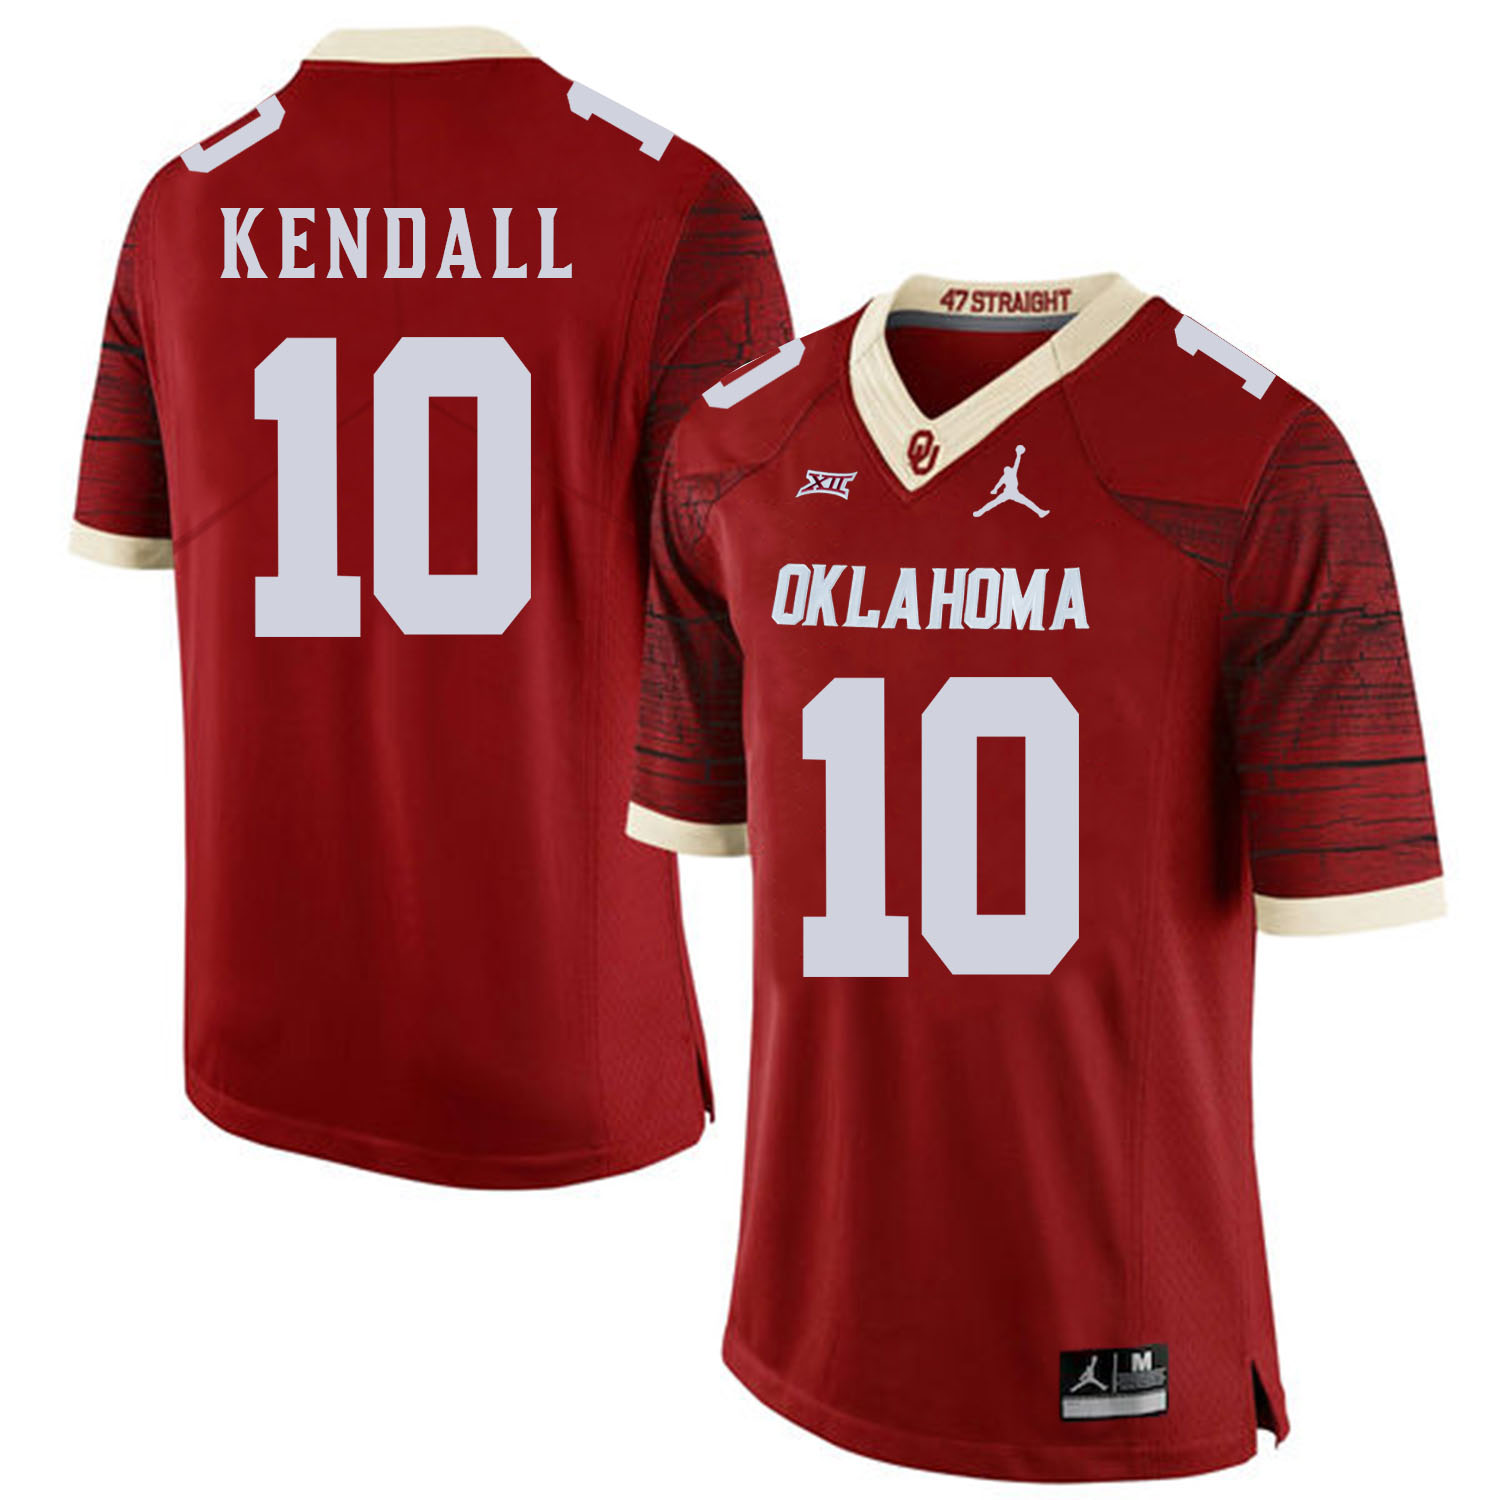 Oklahoma Sooners 10 Austin Kendall Red 47 Game Winning Streak College Football Jersey - Click Image to Close